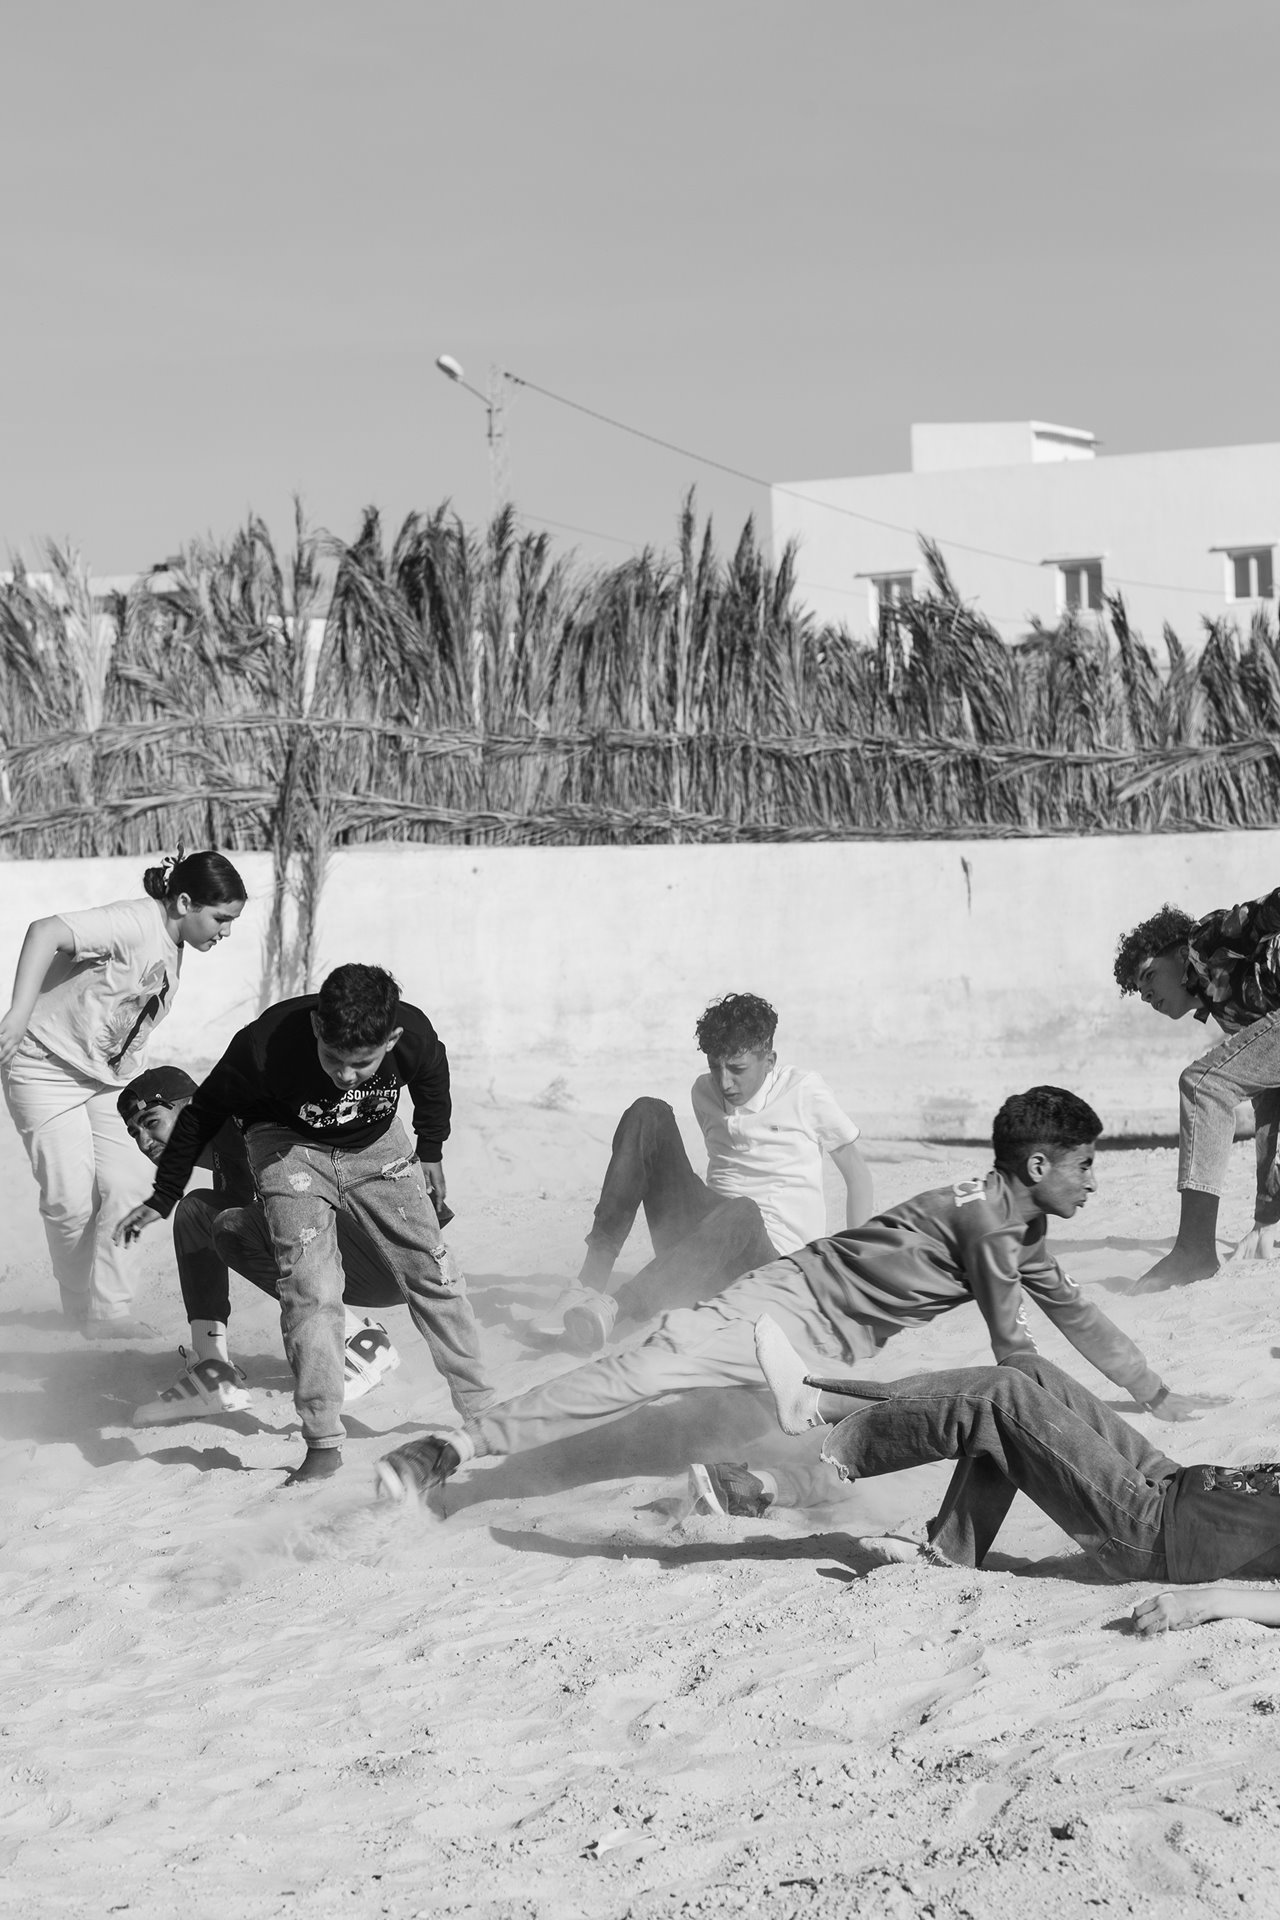 A young theater troupe from the El Guettar youth center in Gafsa rehearse before a performance of a play they are staging in the desert, at the International Sahara Theatre Festival in Nouail, Kebili, Tunisia.